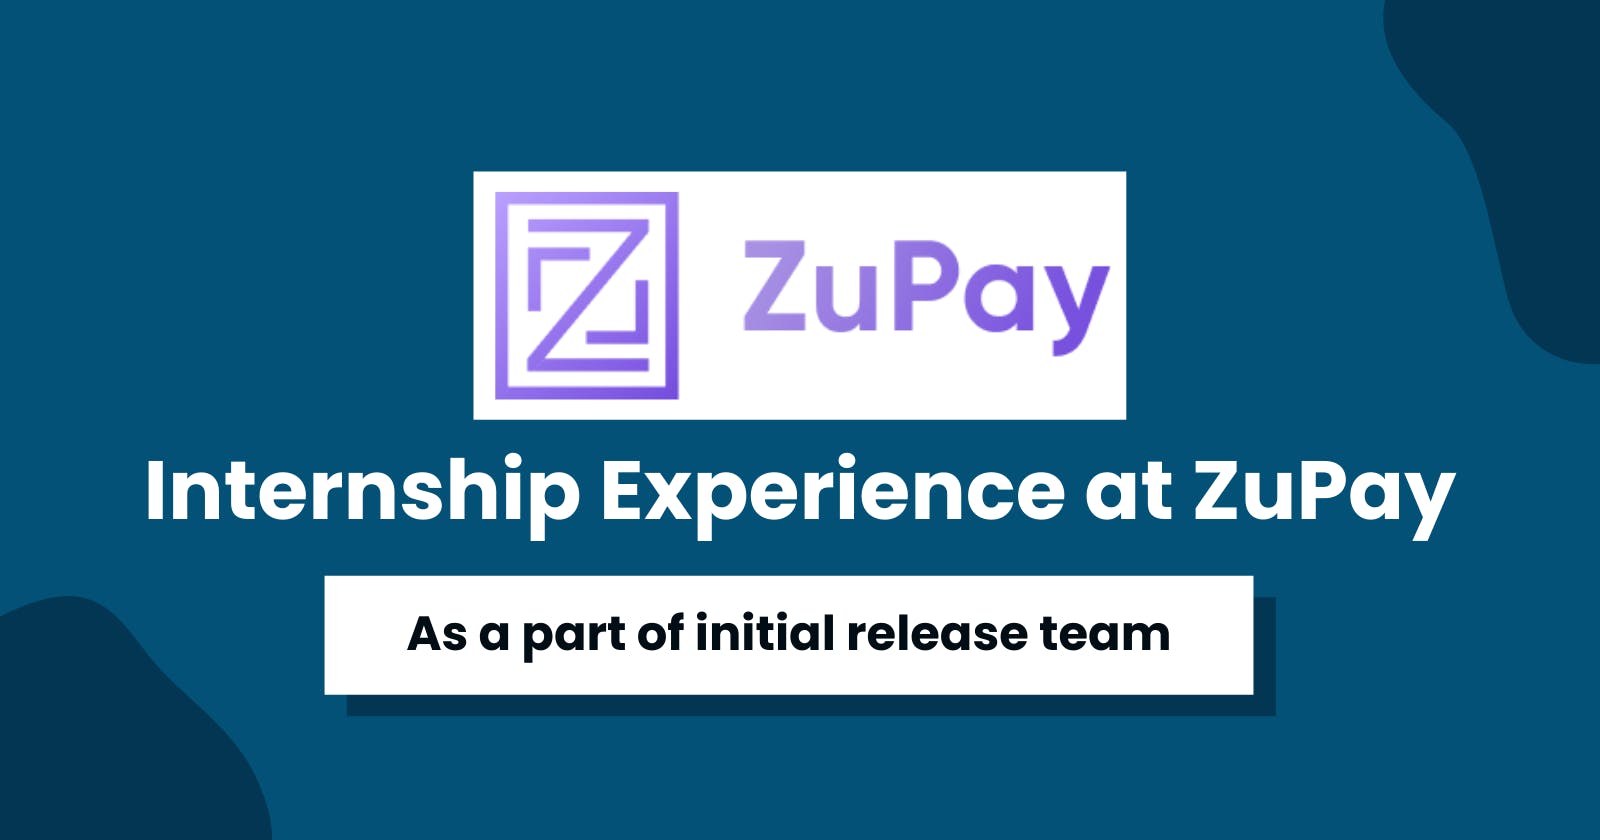 My experience as a part of the initial product launch team at ZuPay.